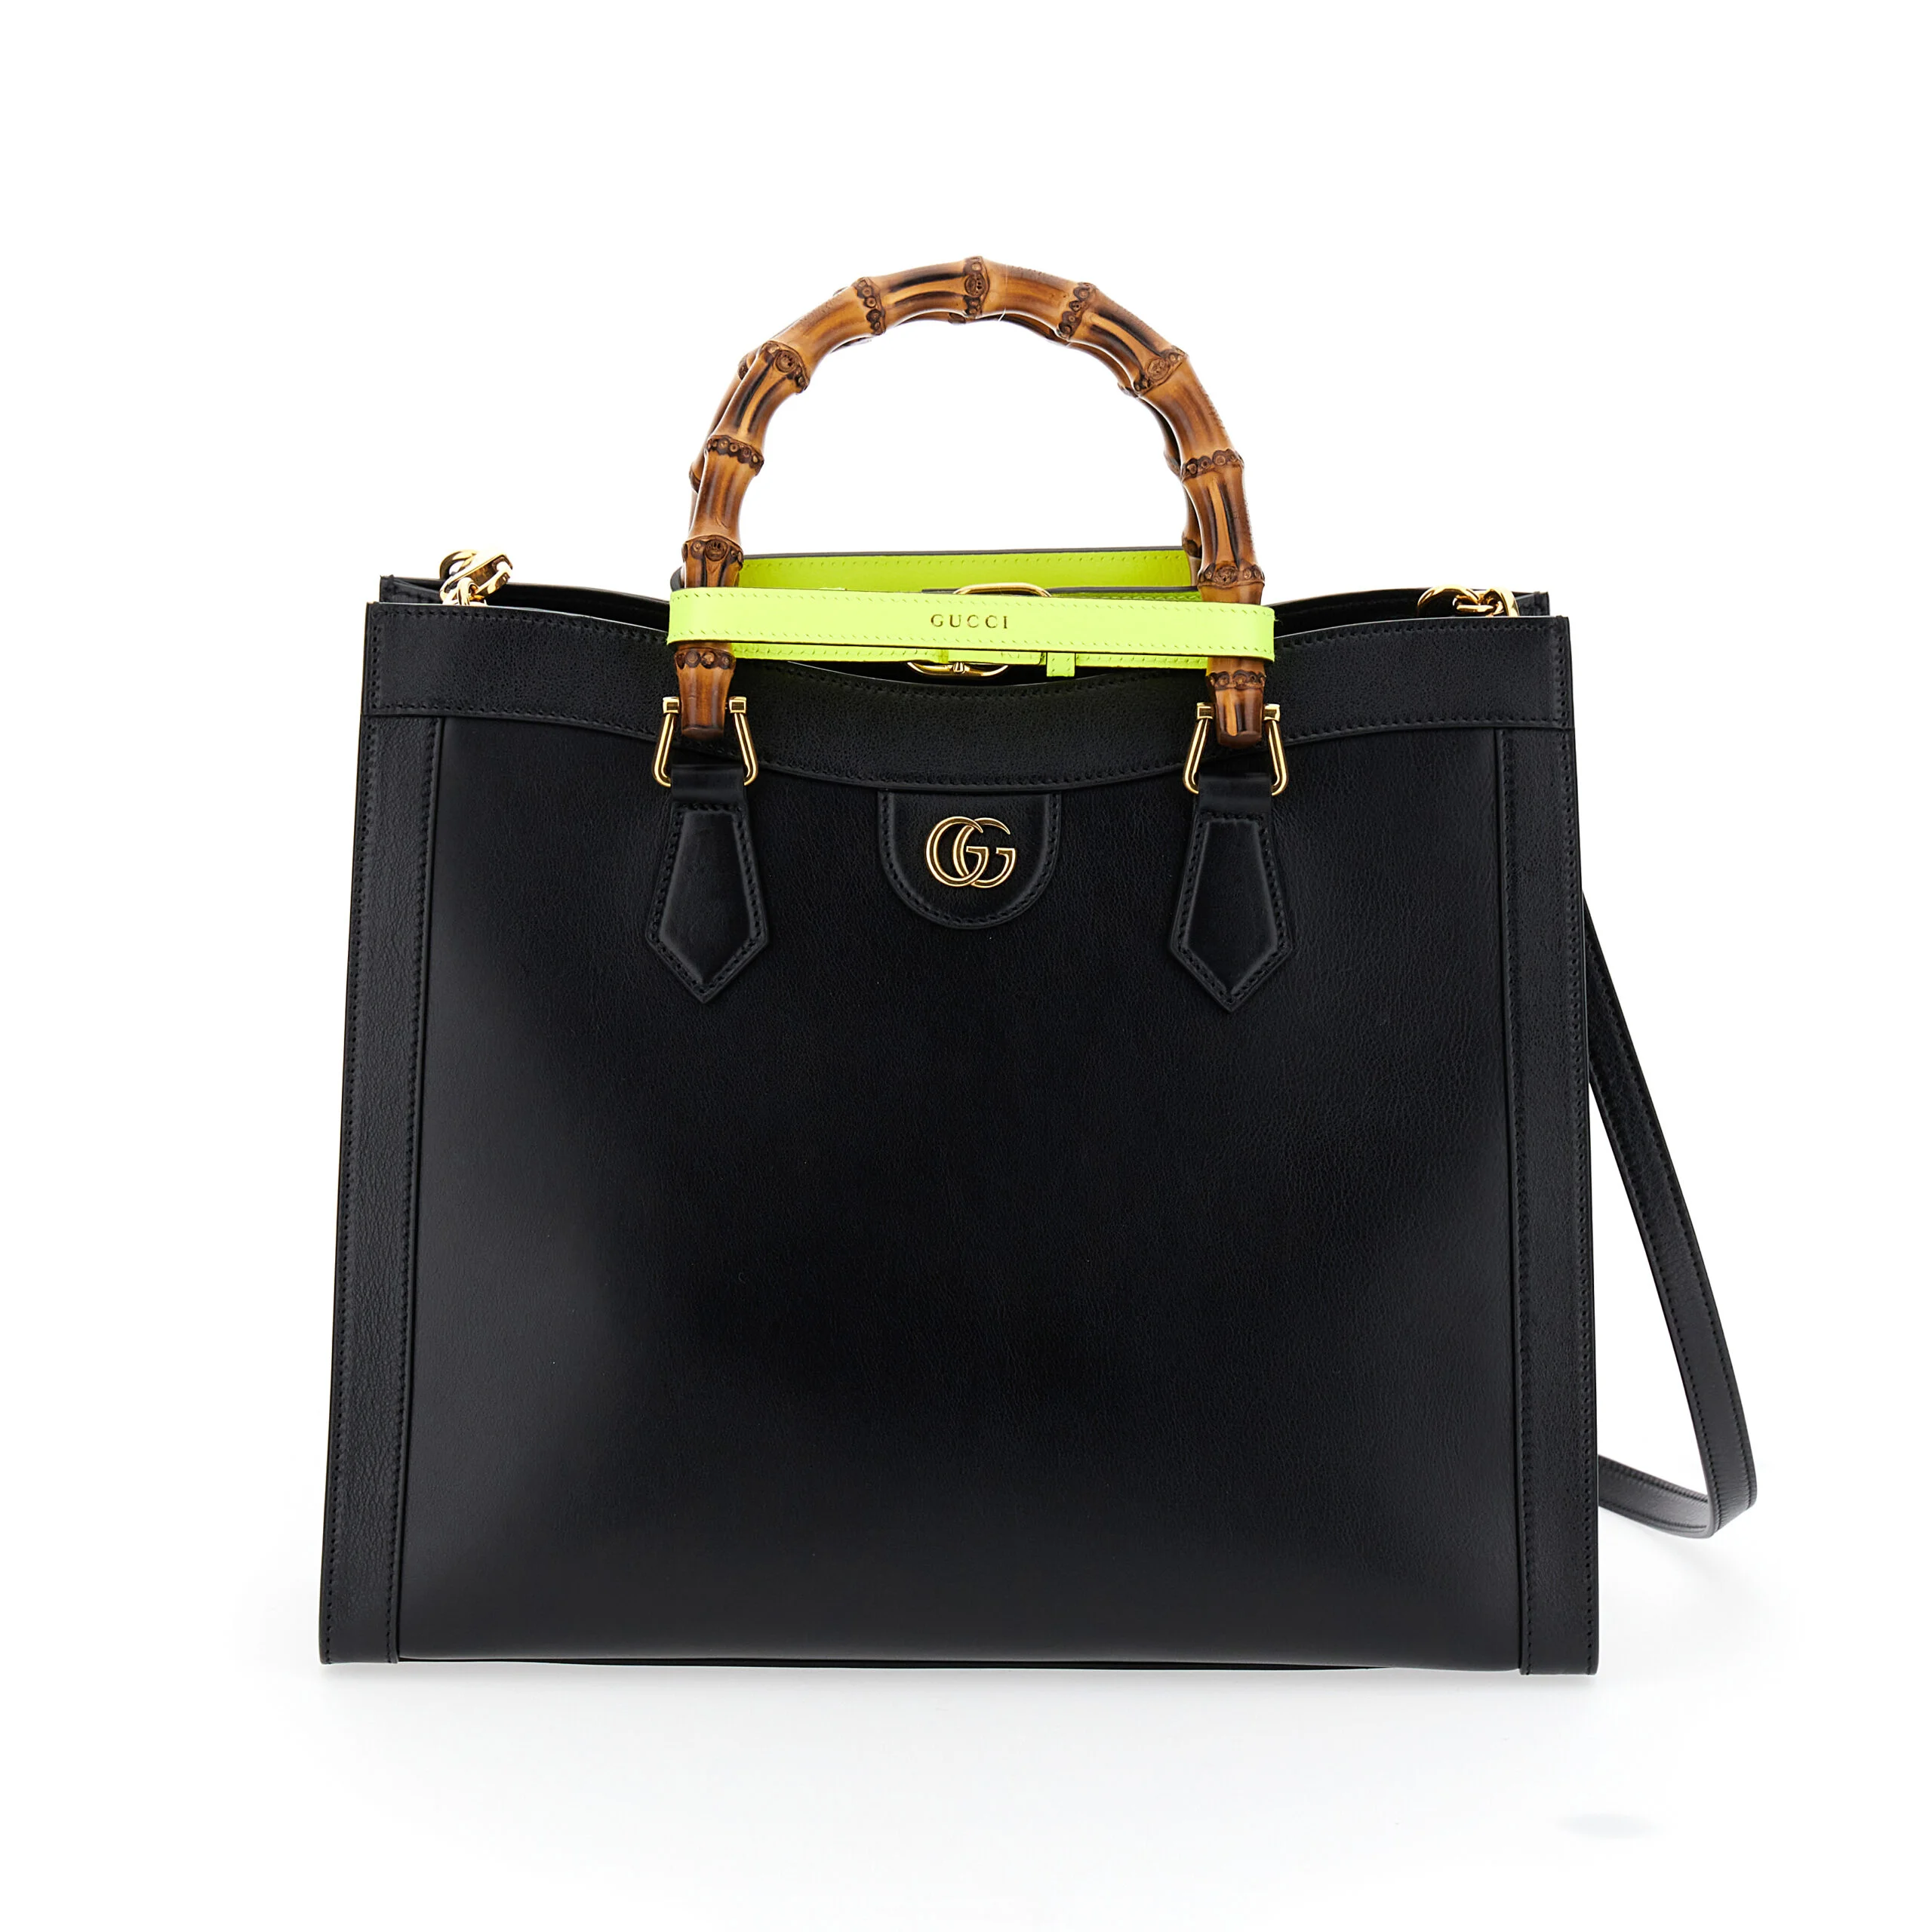 Gucci Diana tote bag image via Rachael Cortese for use by 360 MAGAZINE